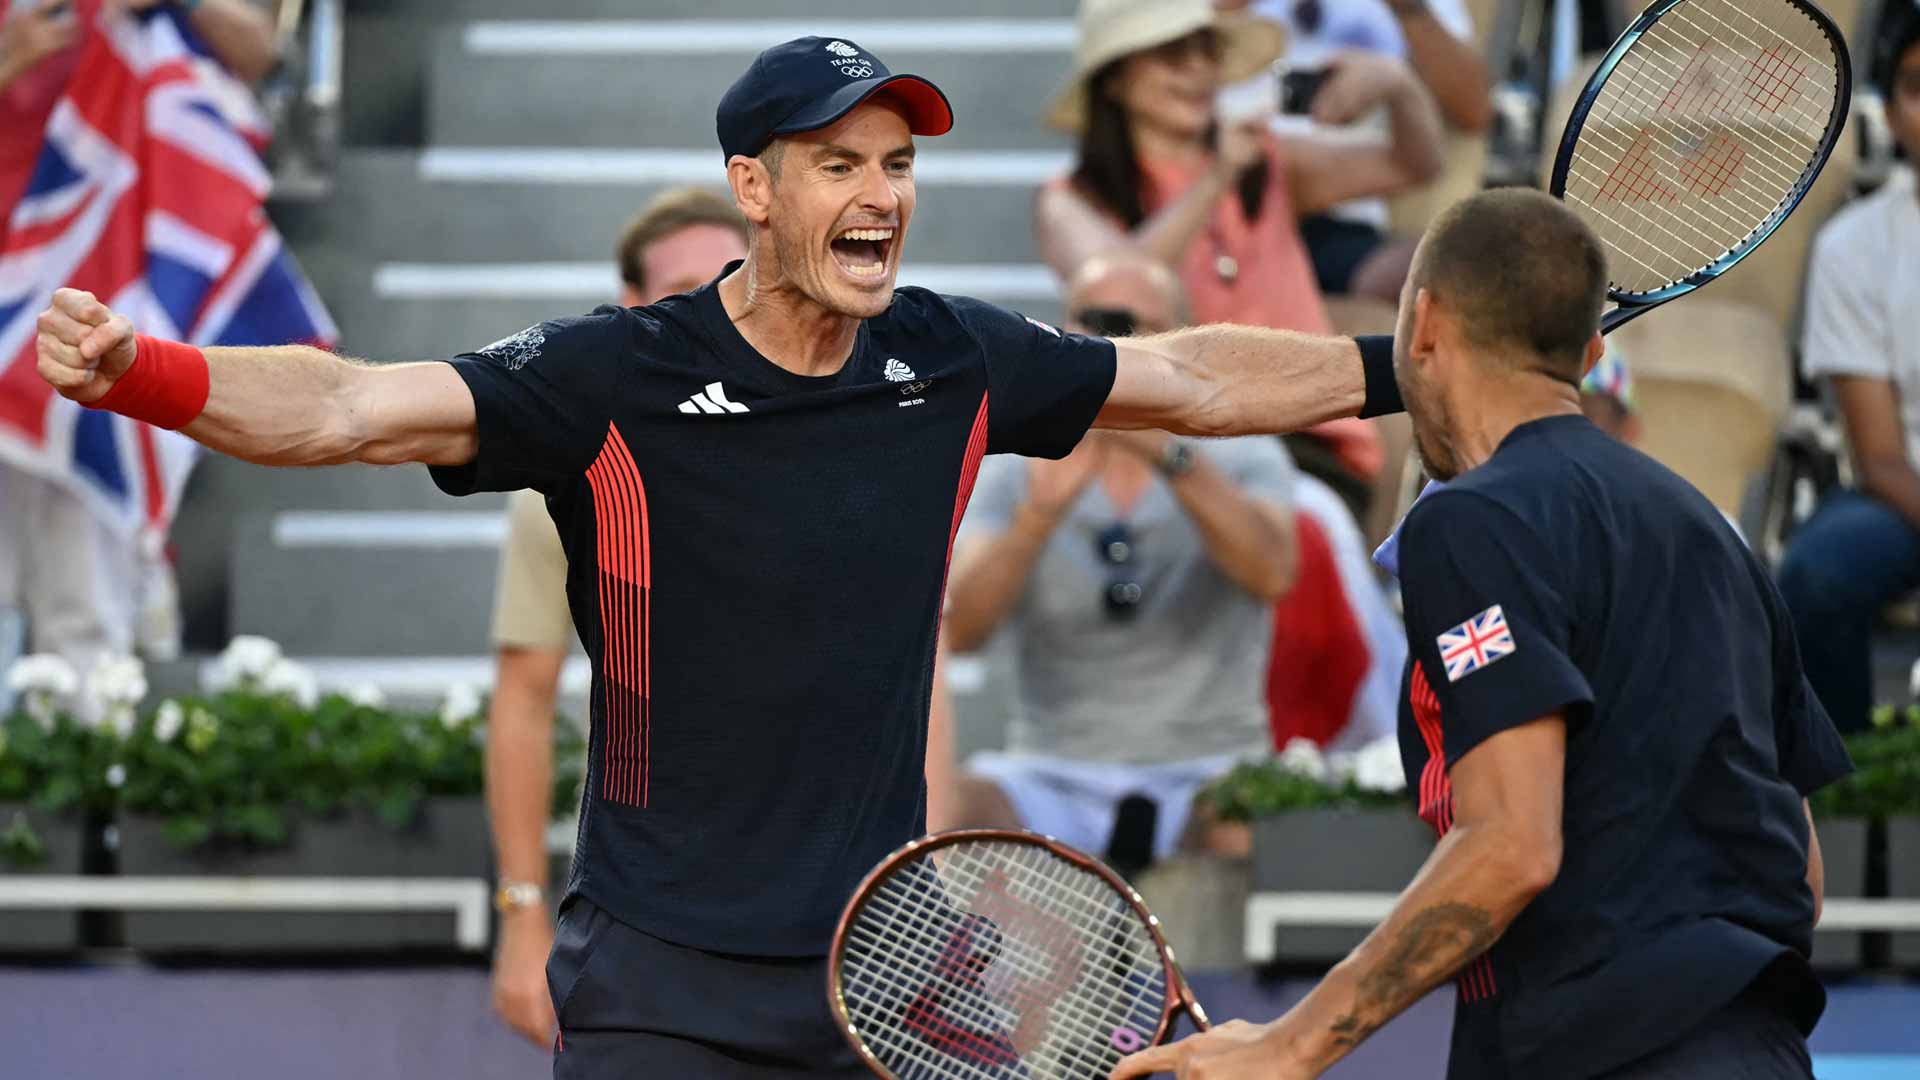 Retirement can wait: Murray, Evans save 5 M.P.s to advance at Olympics